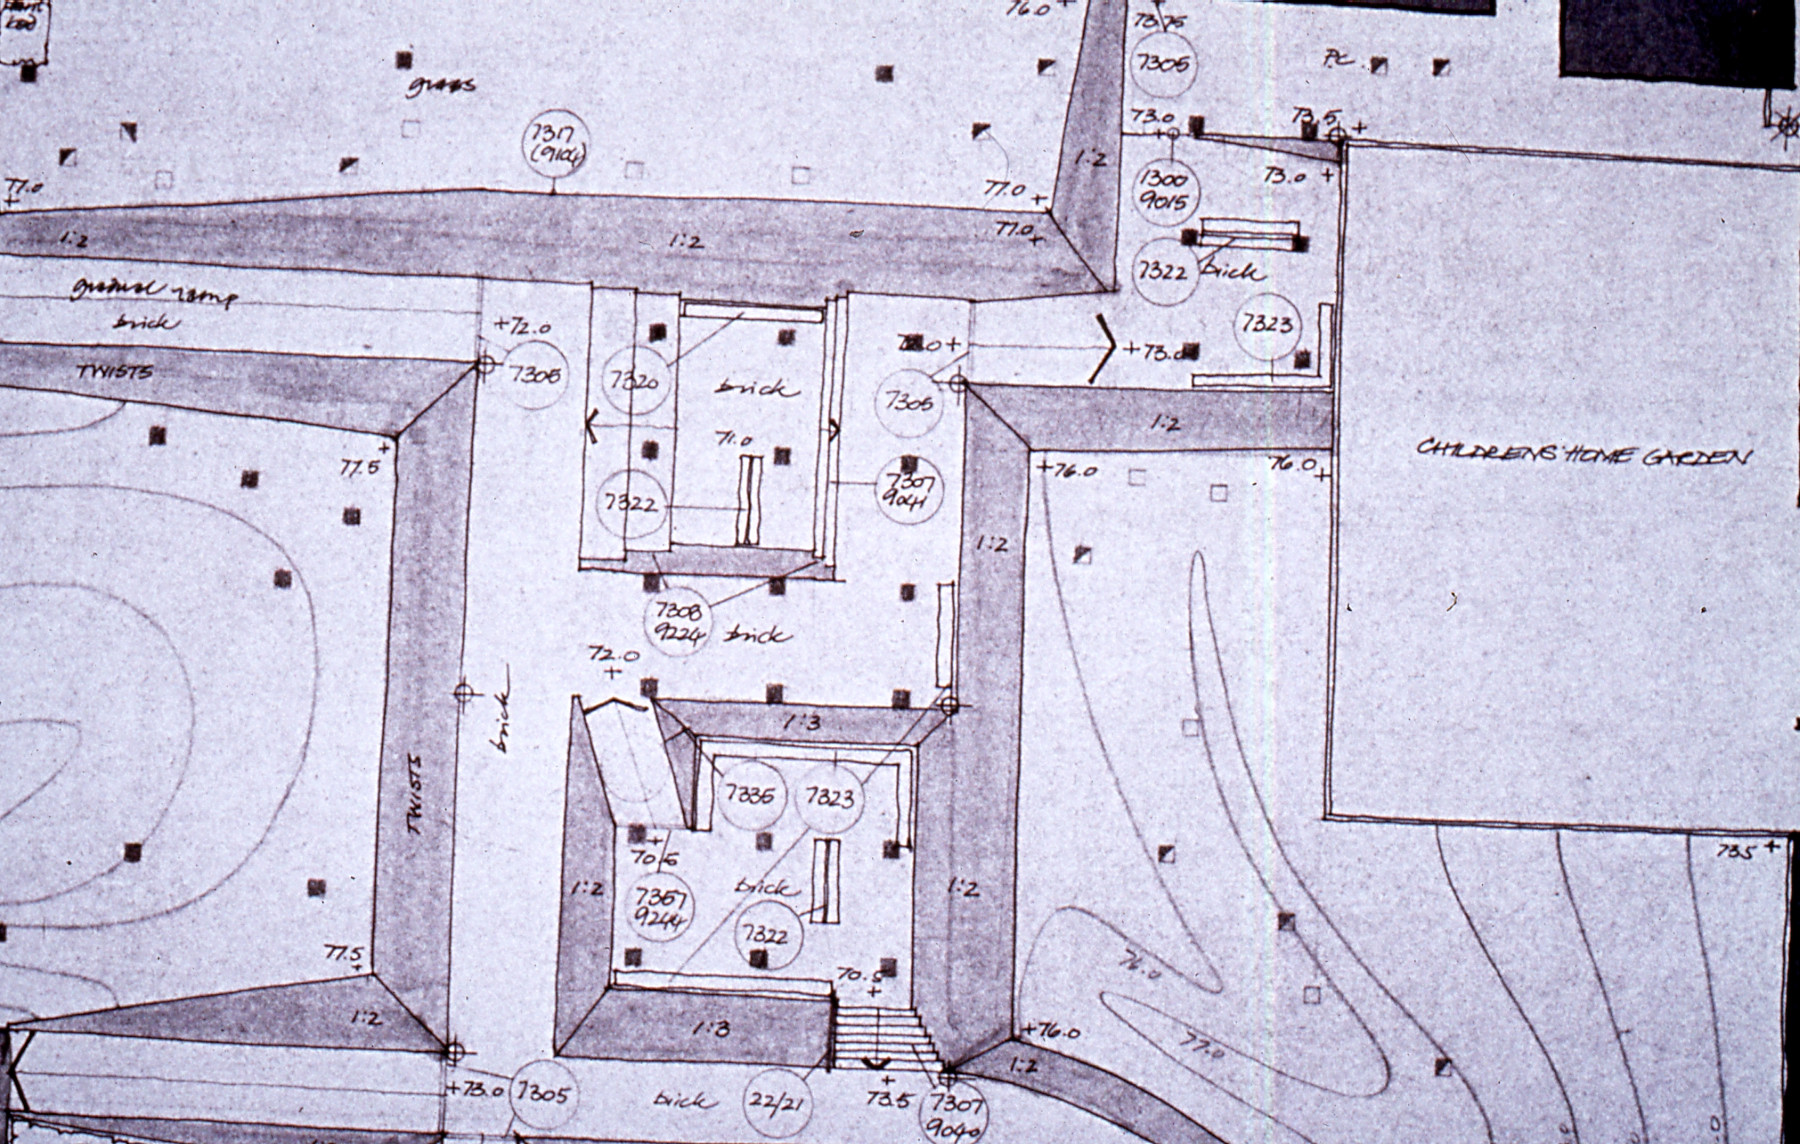 Hand drawn plan of an area of the Brunel Estate, around 1972